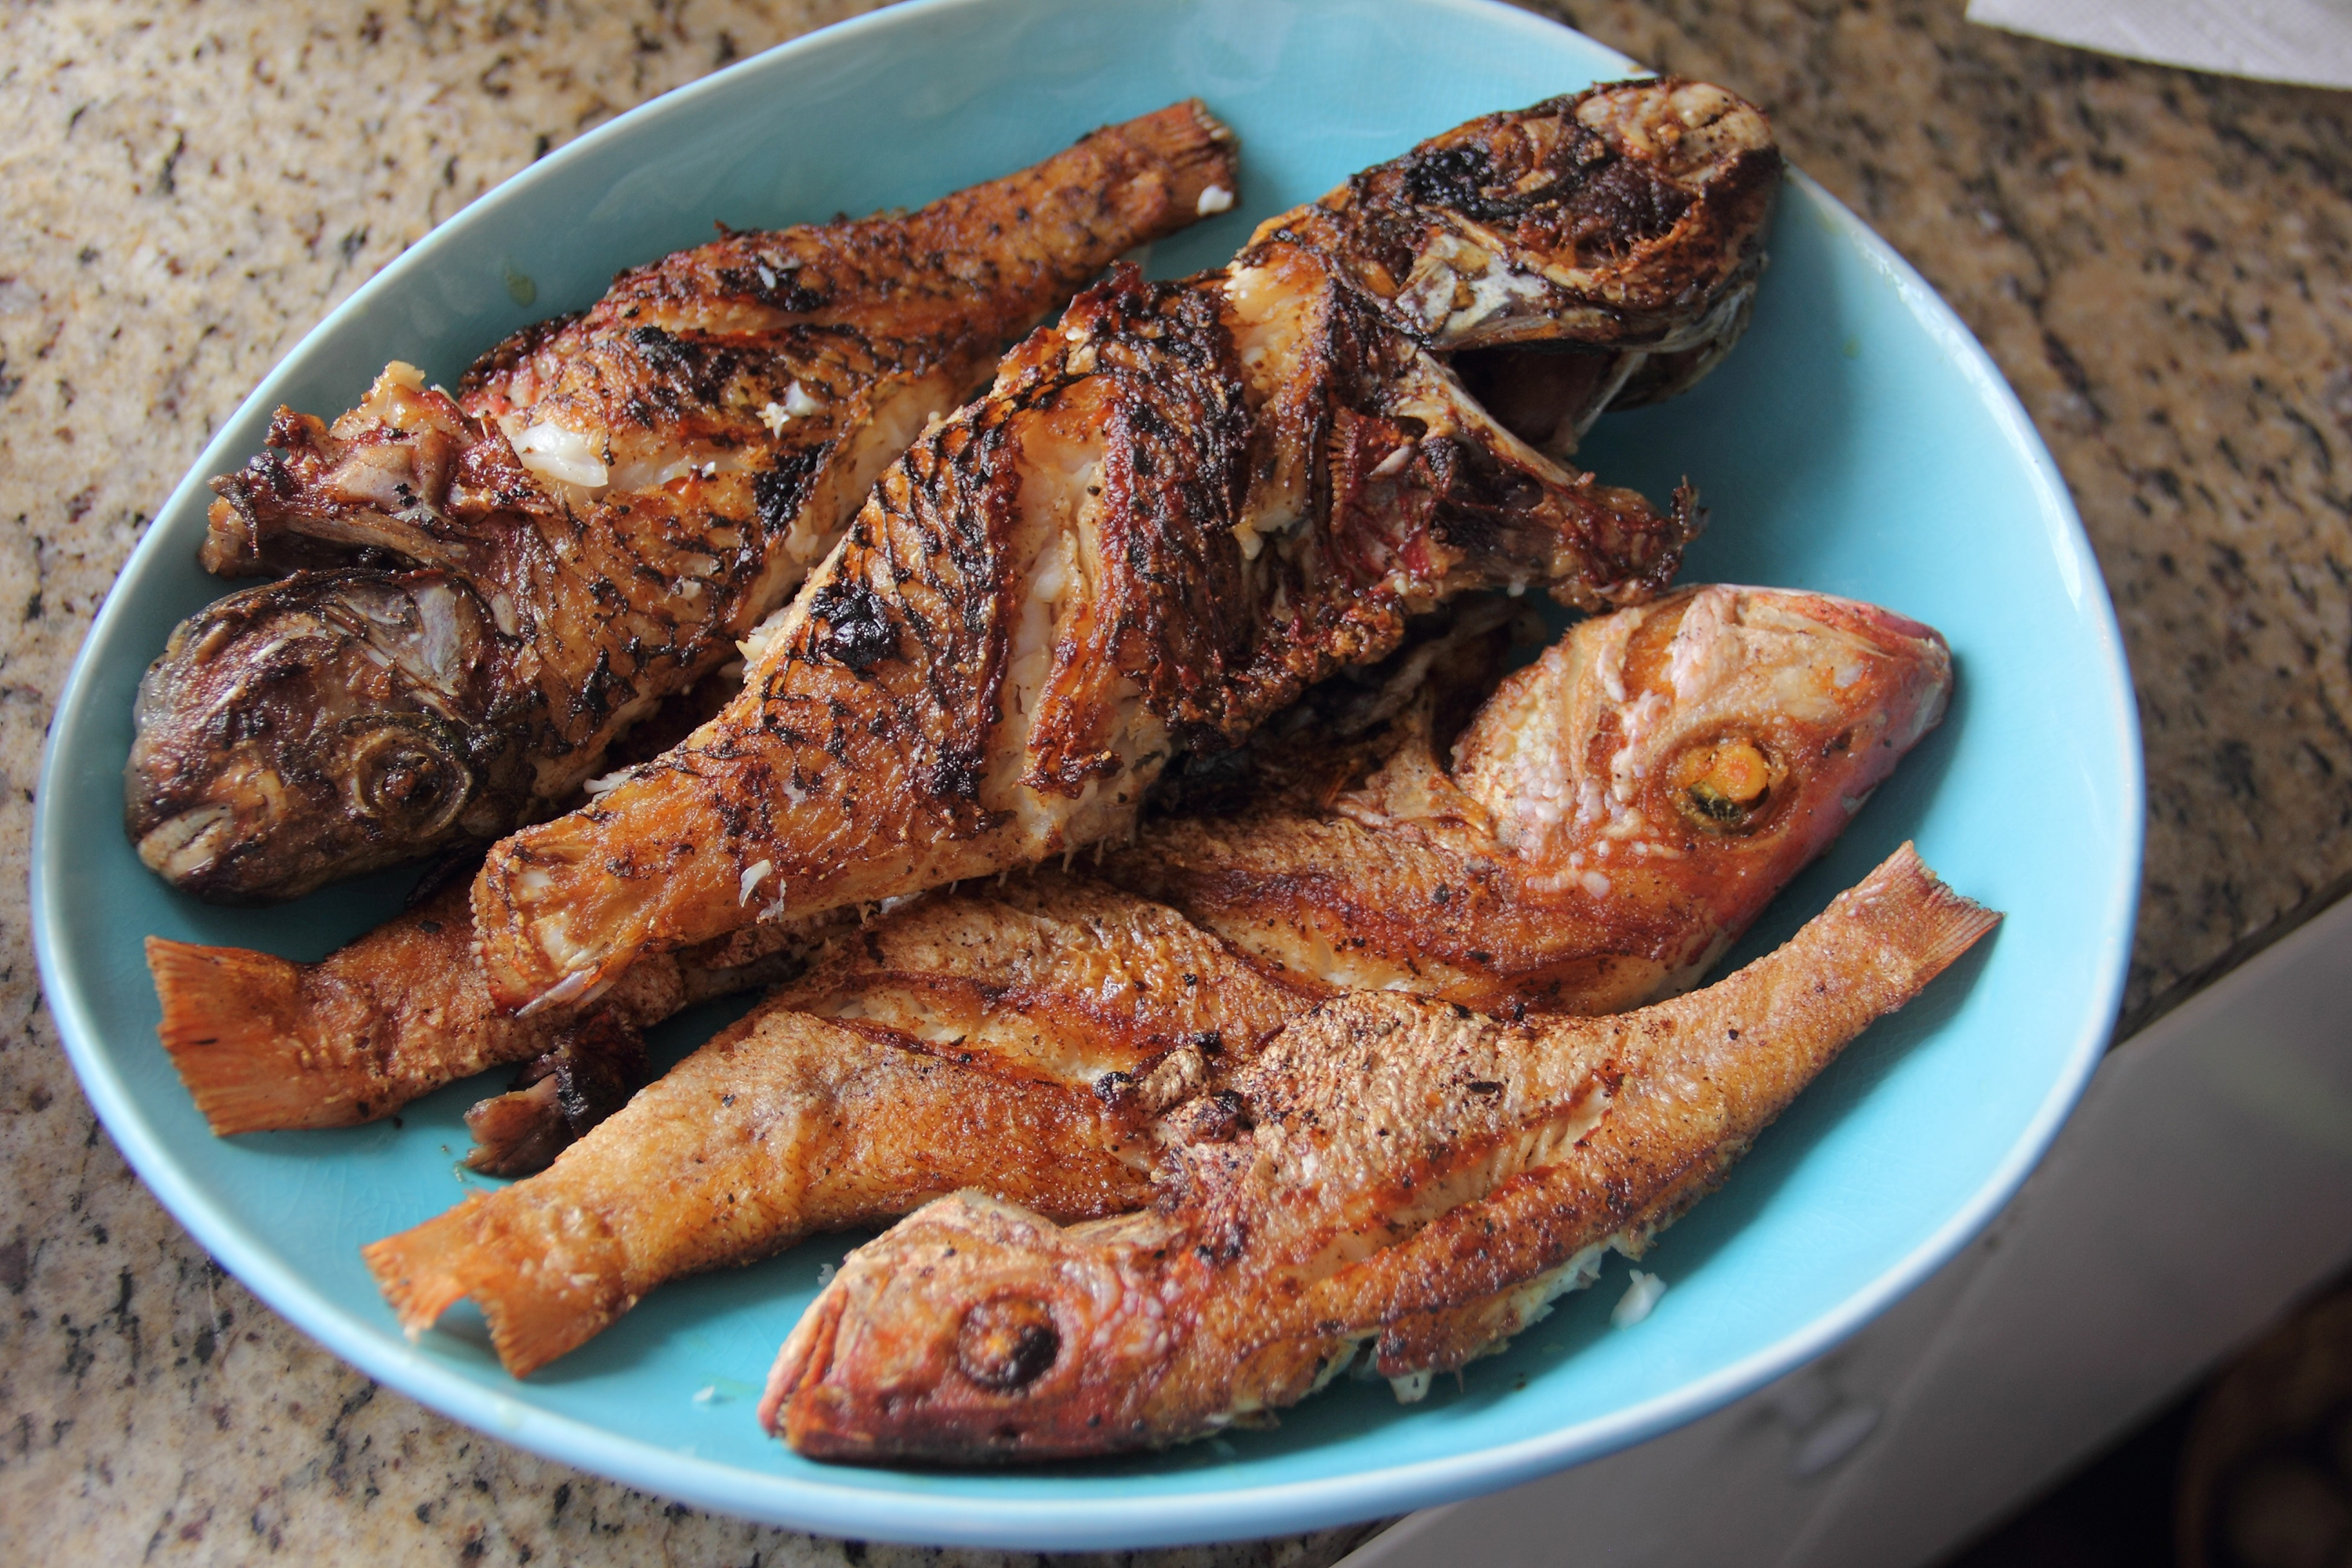 The Best Oils for Deep Frying Fish